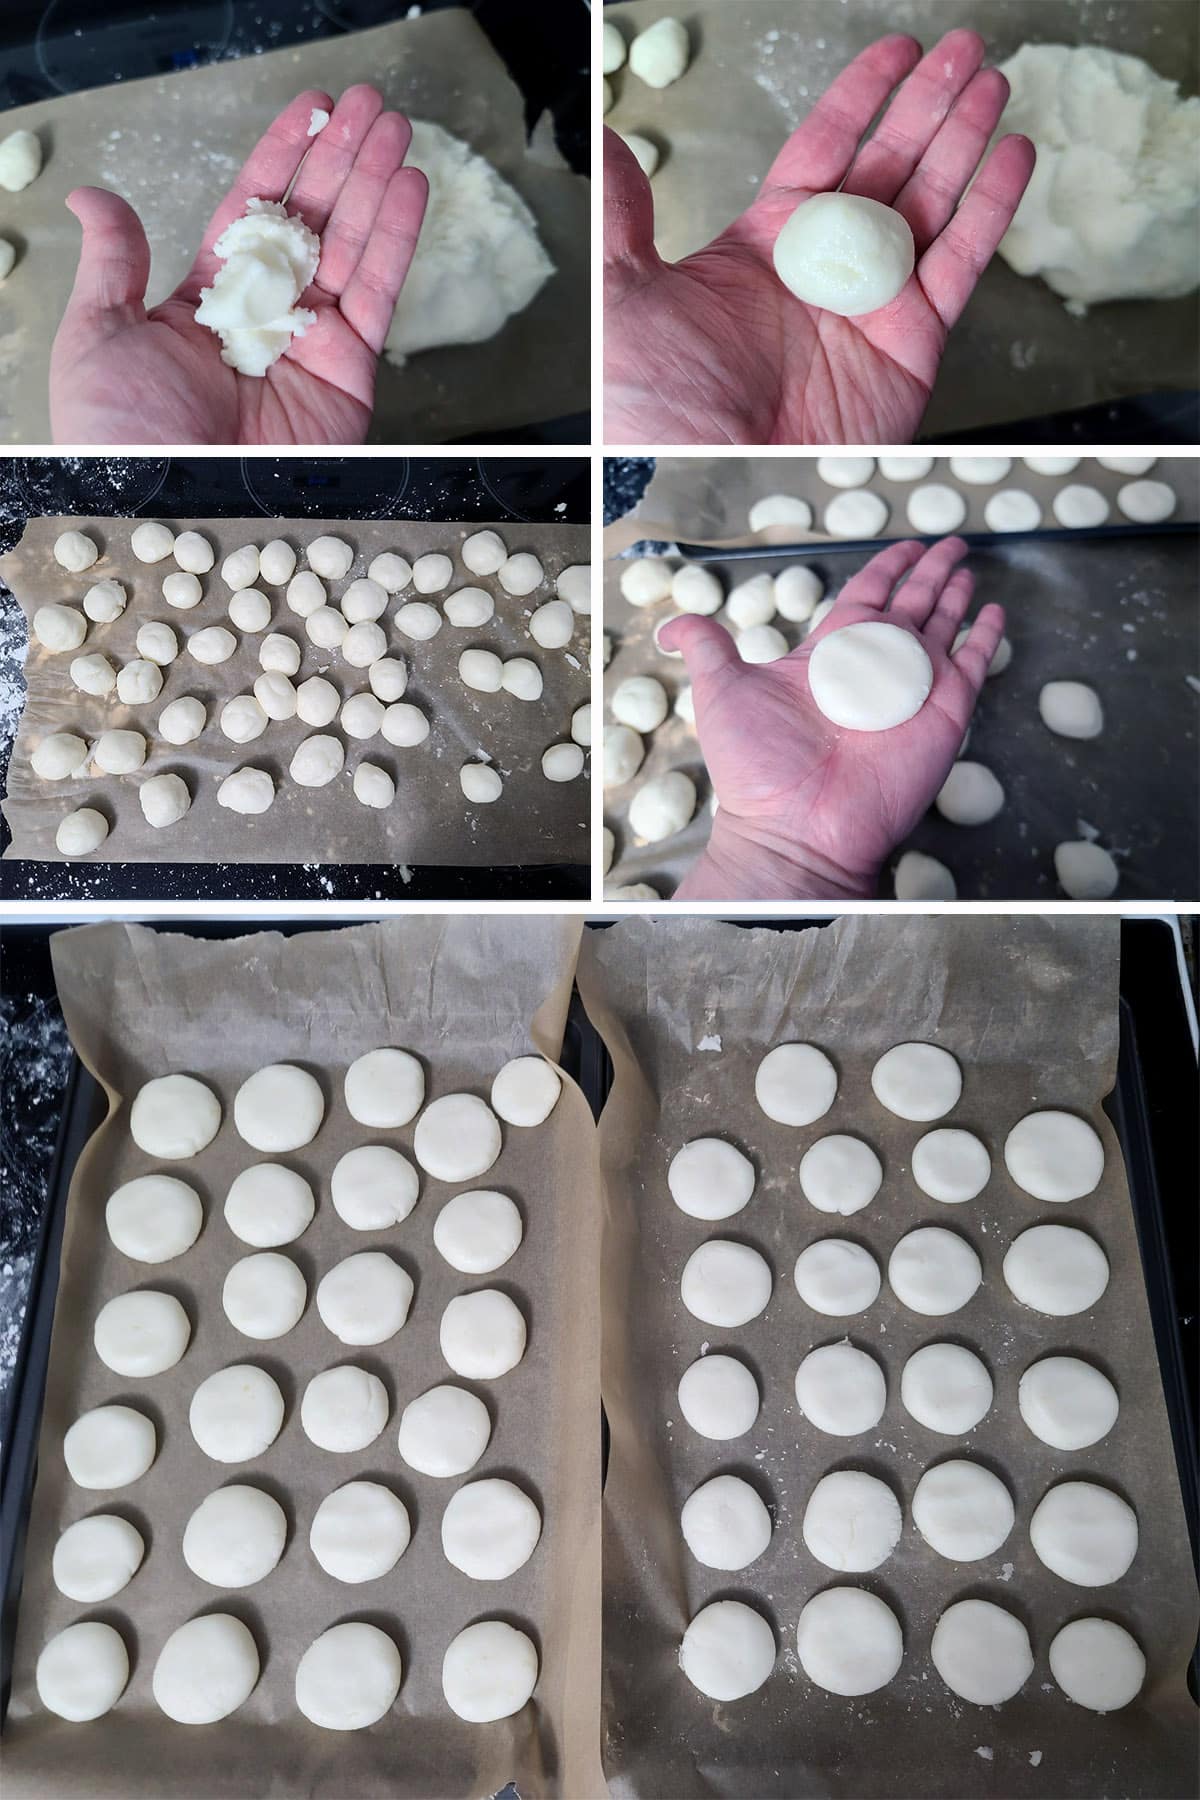 A 5 part image showing the dough being rolled into balls and flattened, then placed on baking sheets.